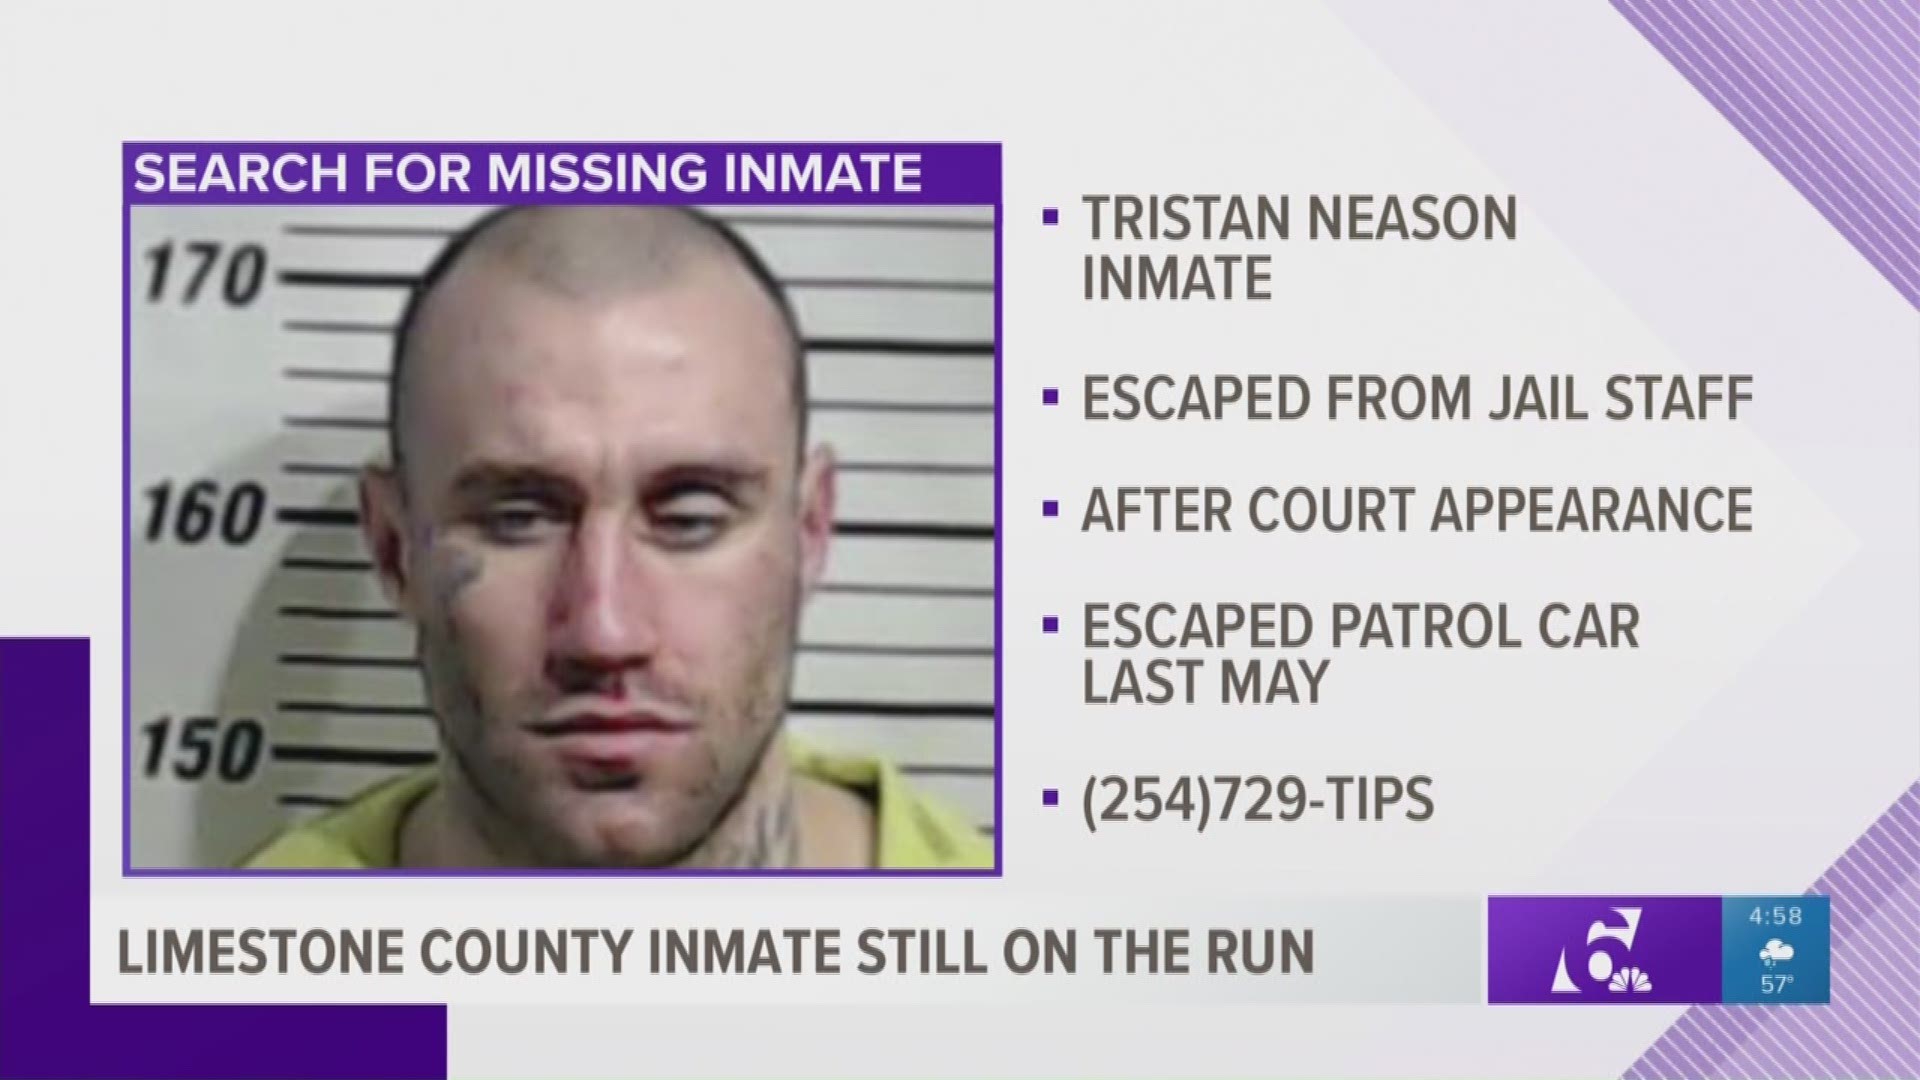 Police across Central Texas are looking for an inmate who escaped form the Limestone County courthouse.